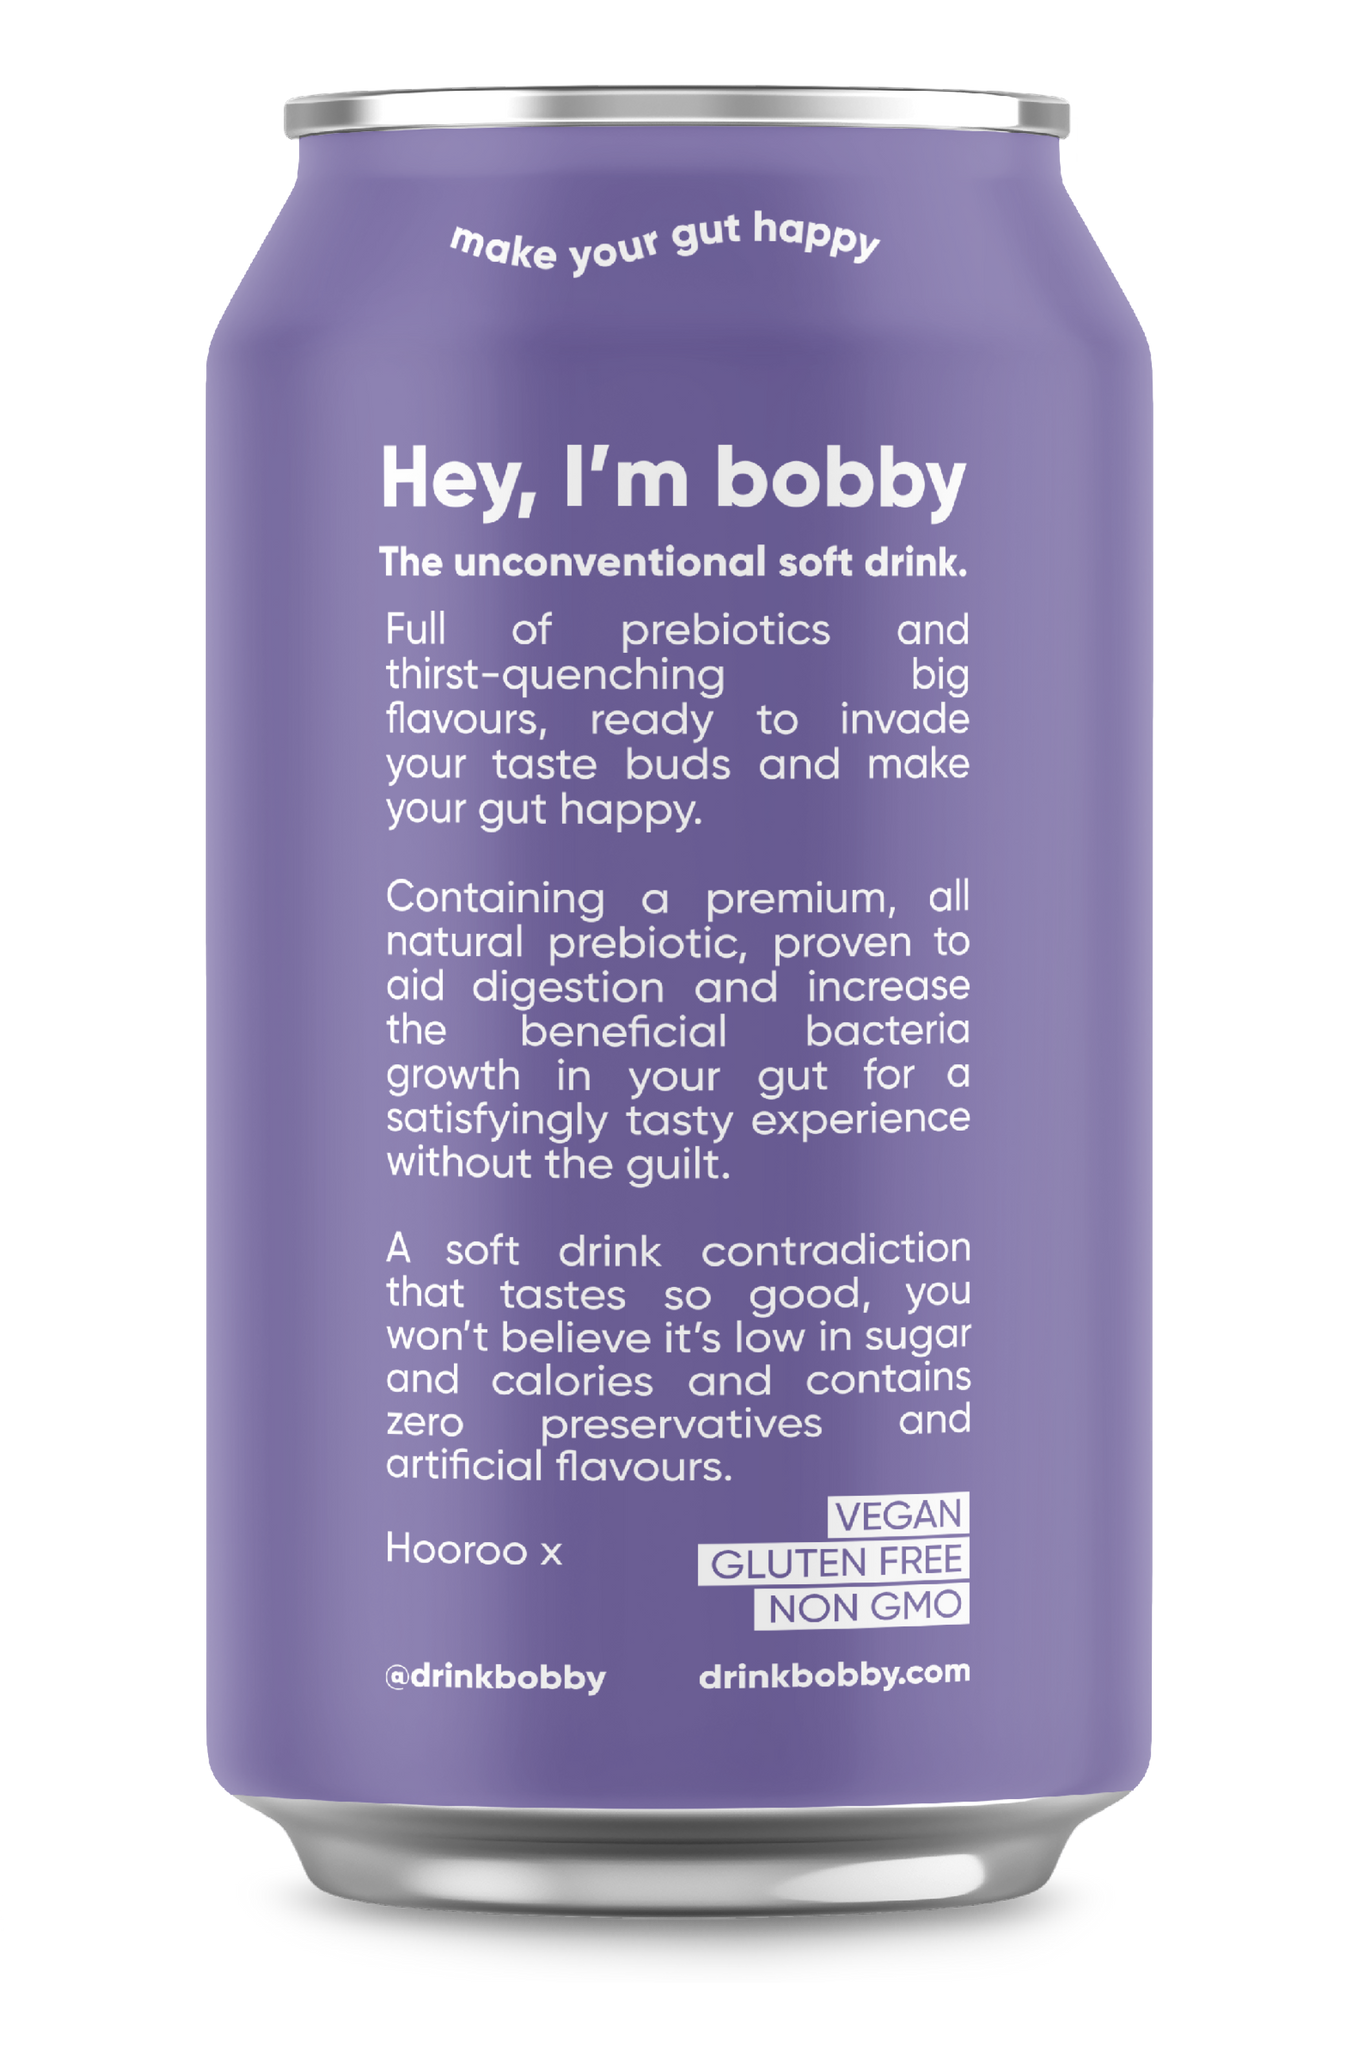 passionfruit perfect in a 330ml can. bobby is vegan, gluten free and non GMO